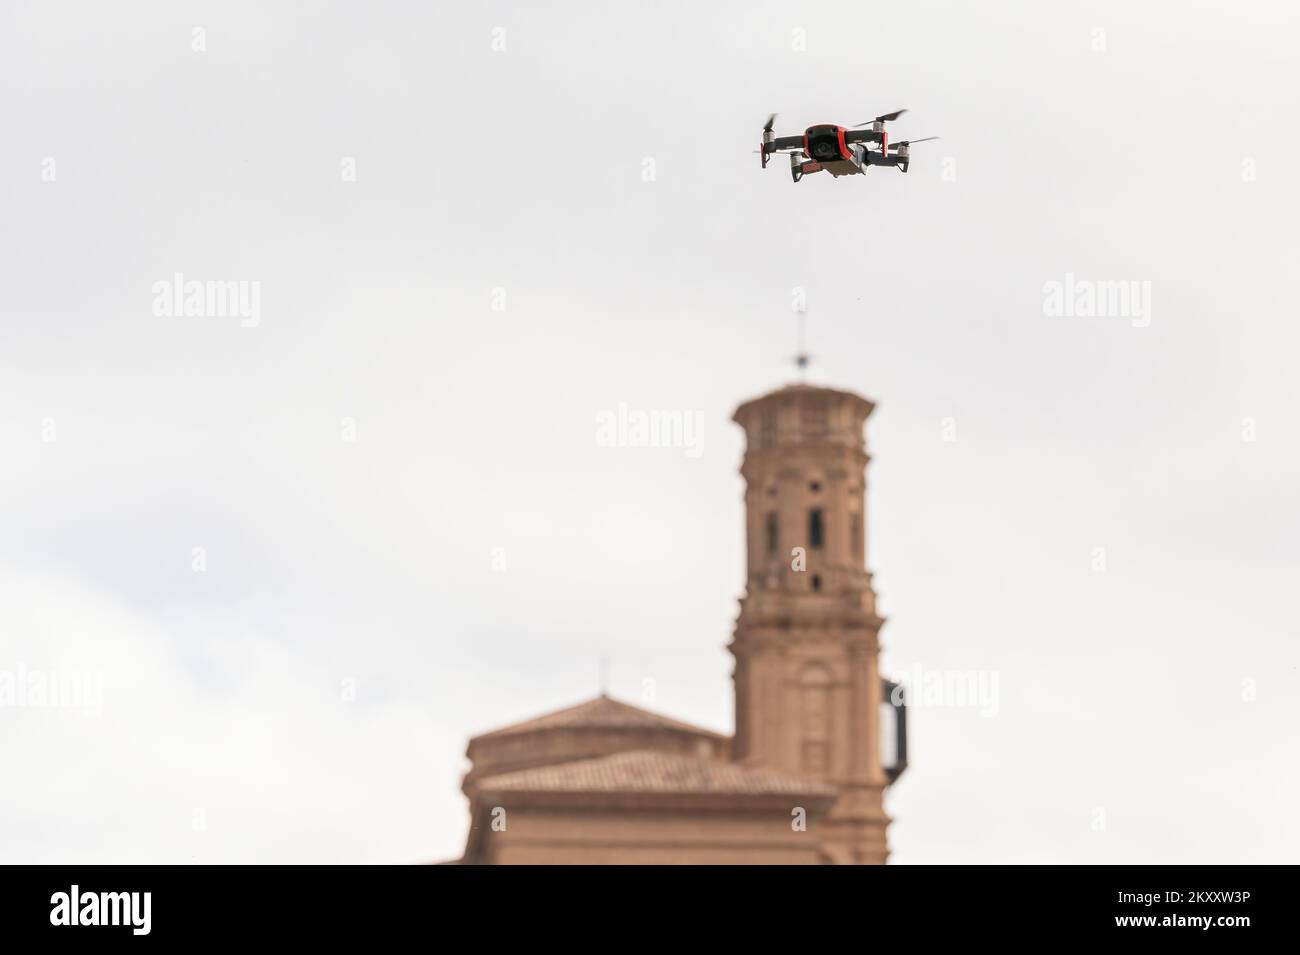 Video recording quadcopter drone flying in a clear sky near a church Stock Photo